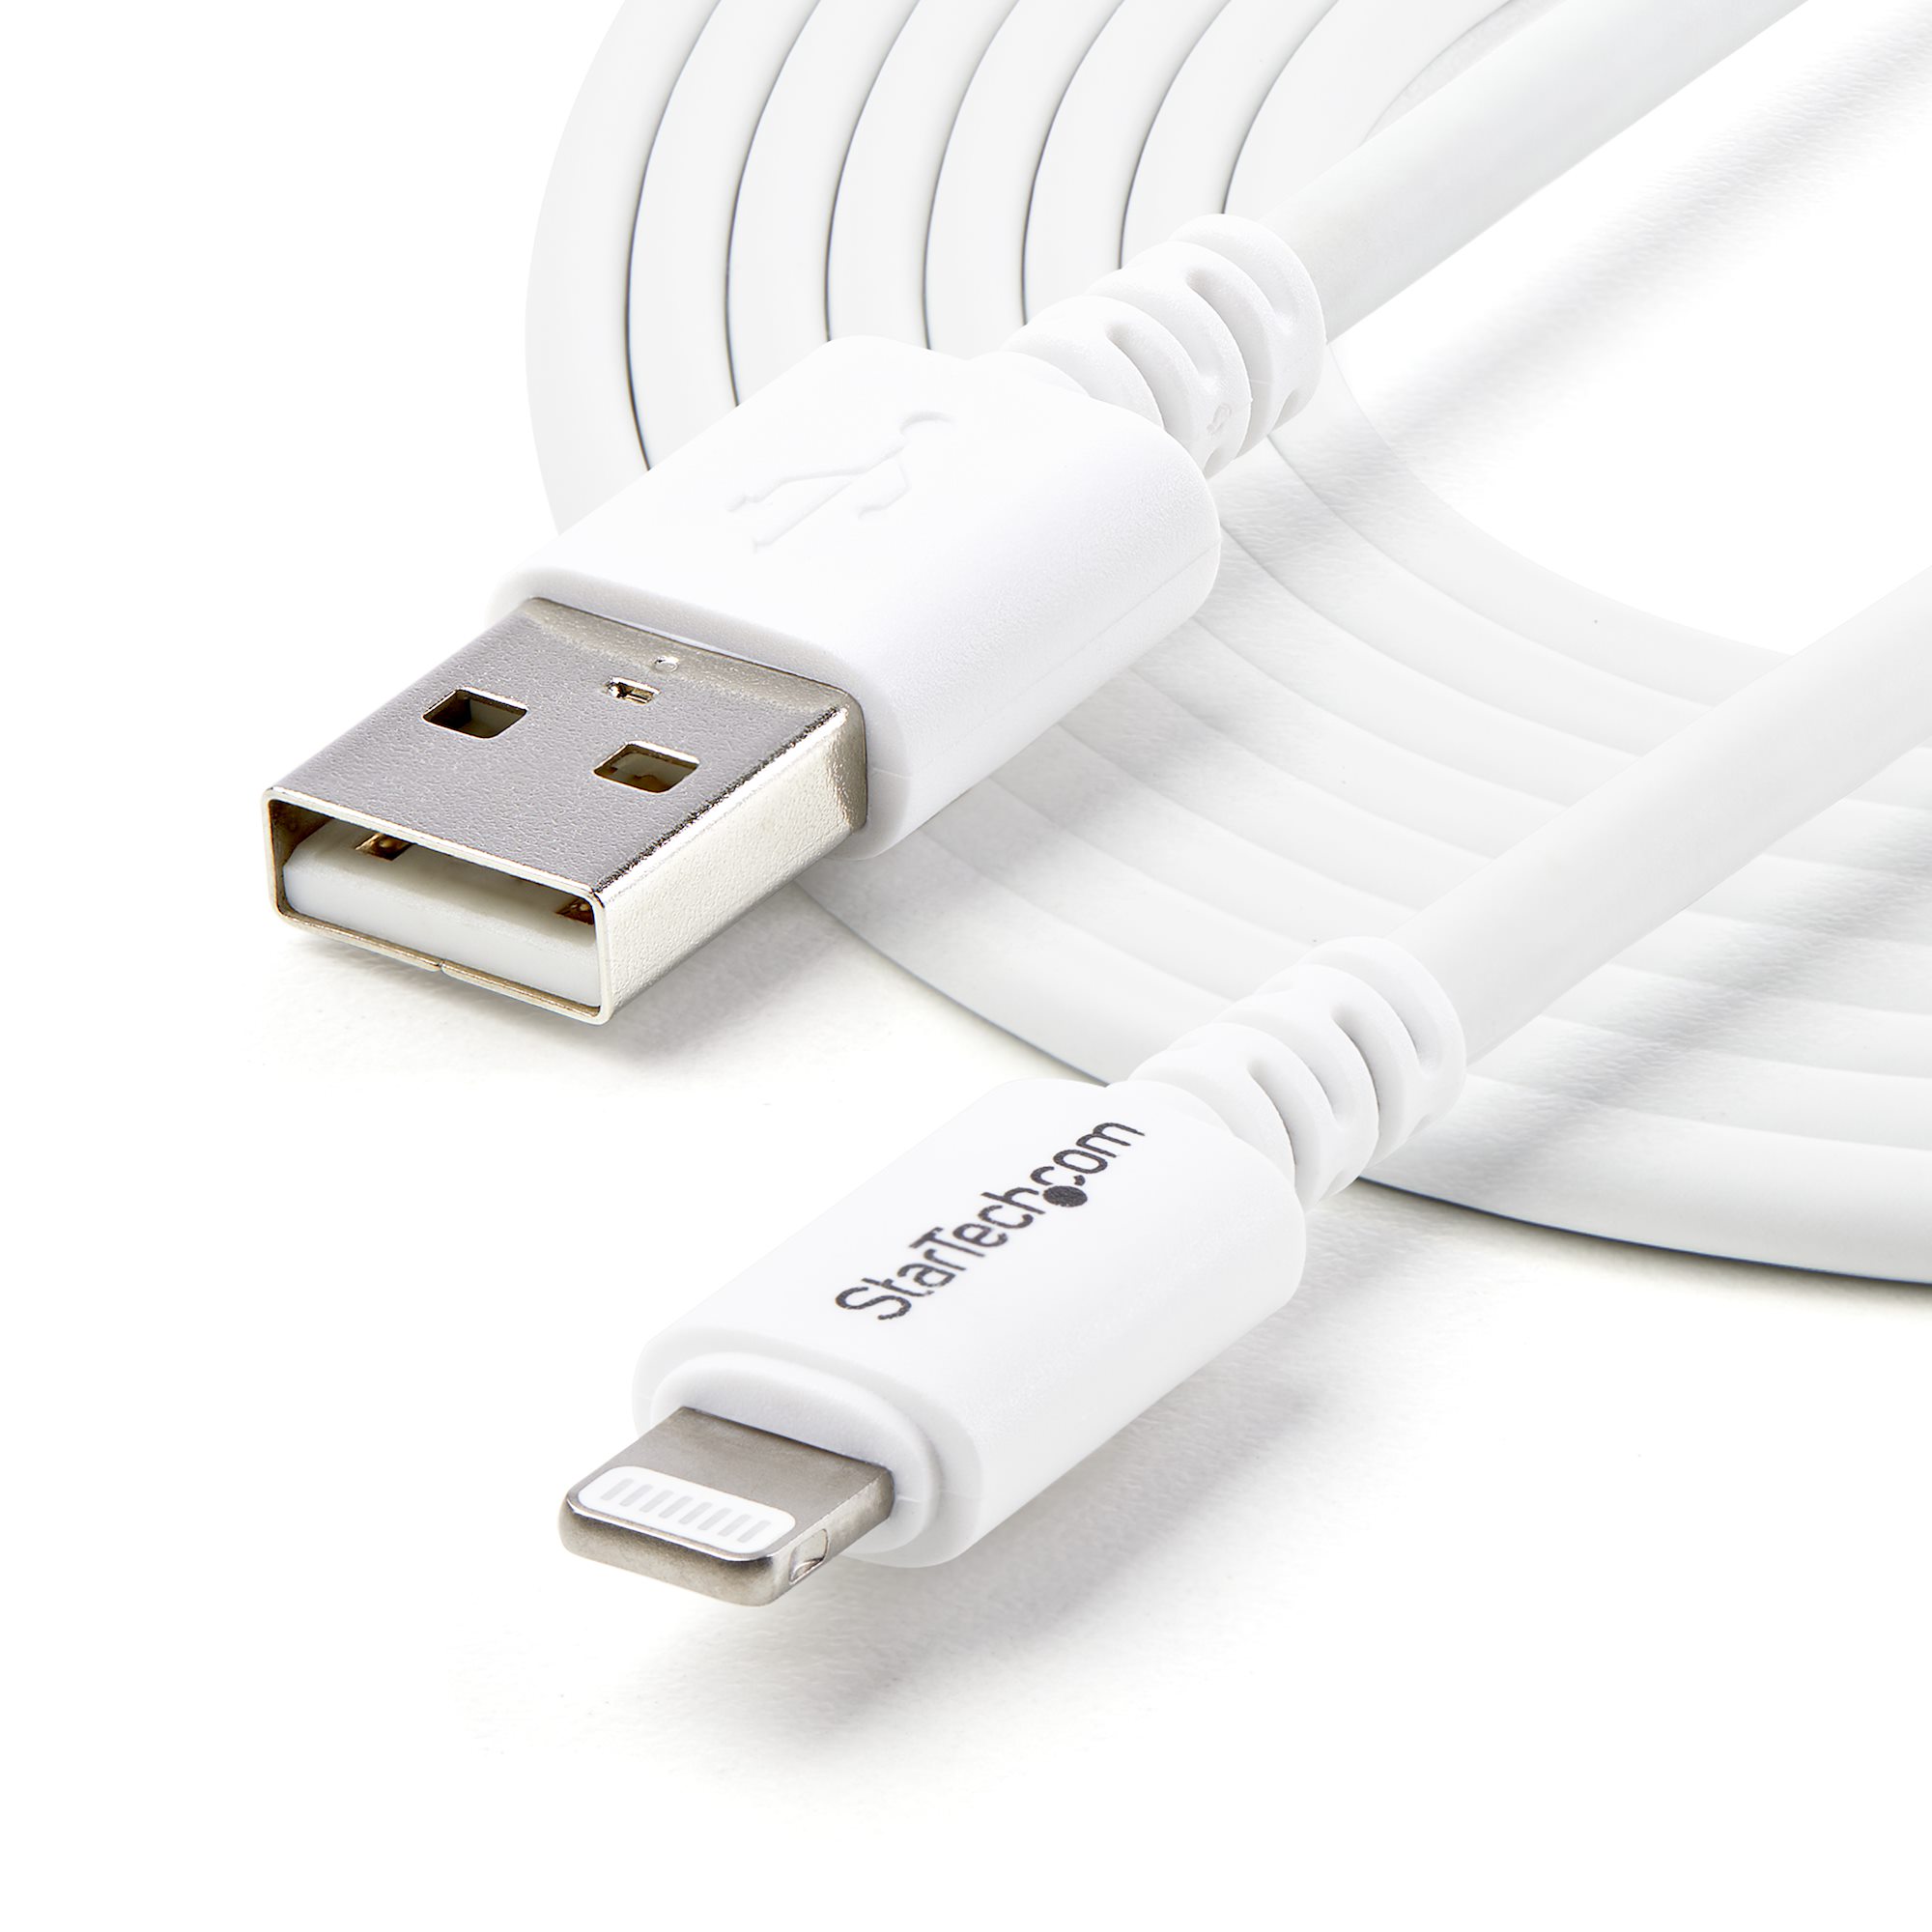 30 cm (11 in) USB to Lightning Cable - Short iPhone / iPad / iPod Charger  Cable - Lightning to USB Cable - Apple MFi Certified - White